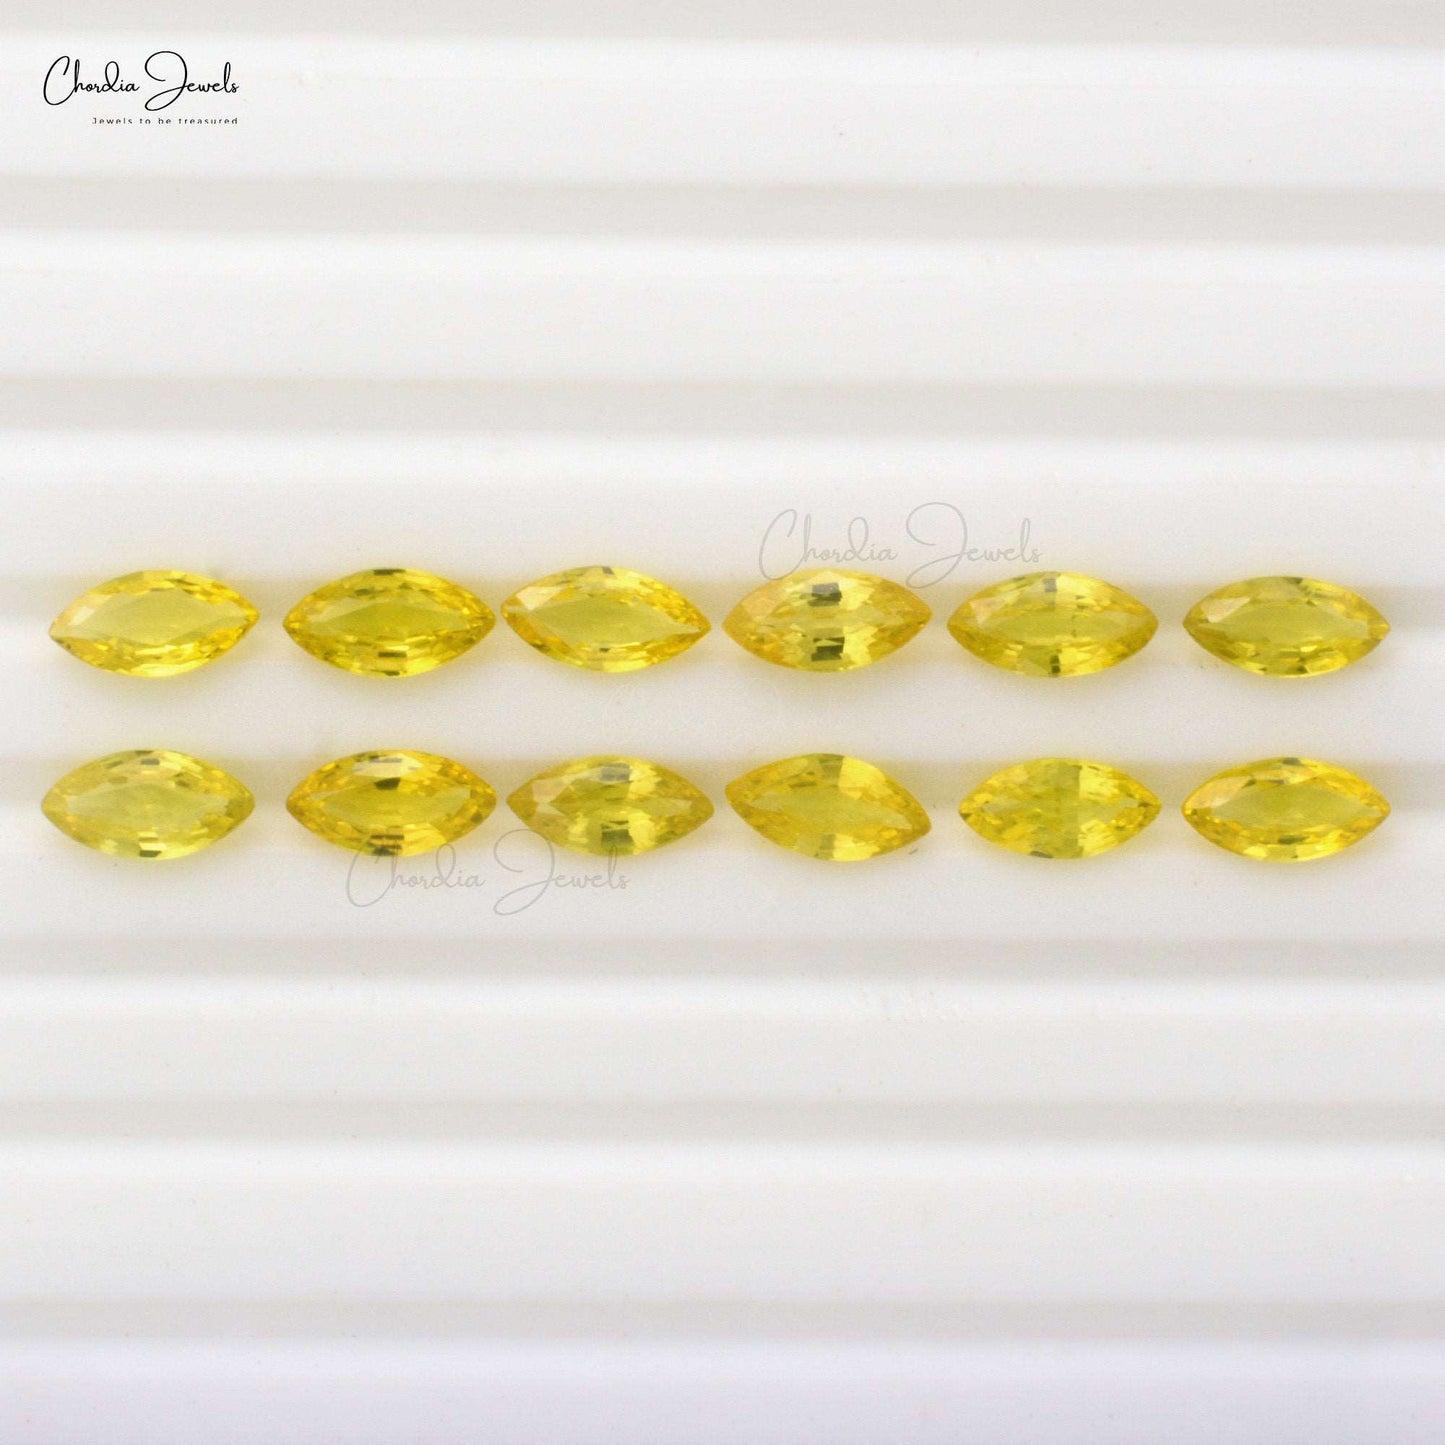 Load image into Gallery viewer, 100% Natural Yellow Sapphire Stone Marquise-Cut 5x2.50mm, September Birthstone, 0.13 Carats Stone Weight, Stone Cutting: Excellent from Chordia Jewels
